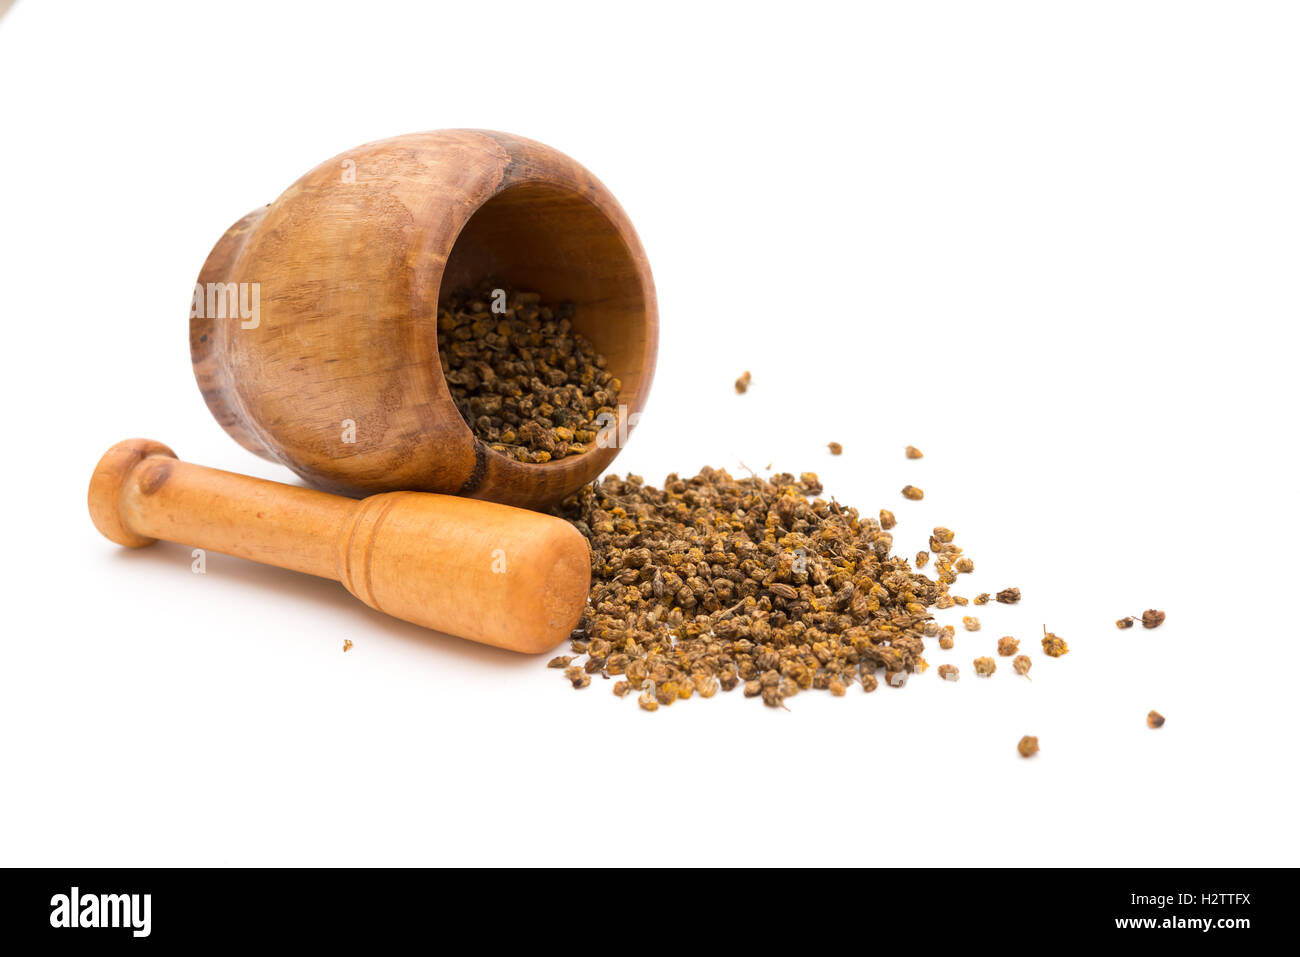 wooden mortar and pestle with flos chrysanthemi indic on white background Stock Photo